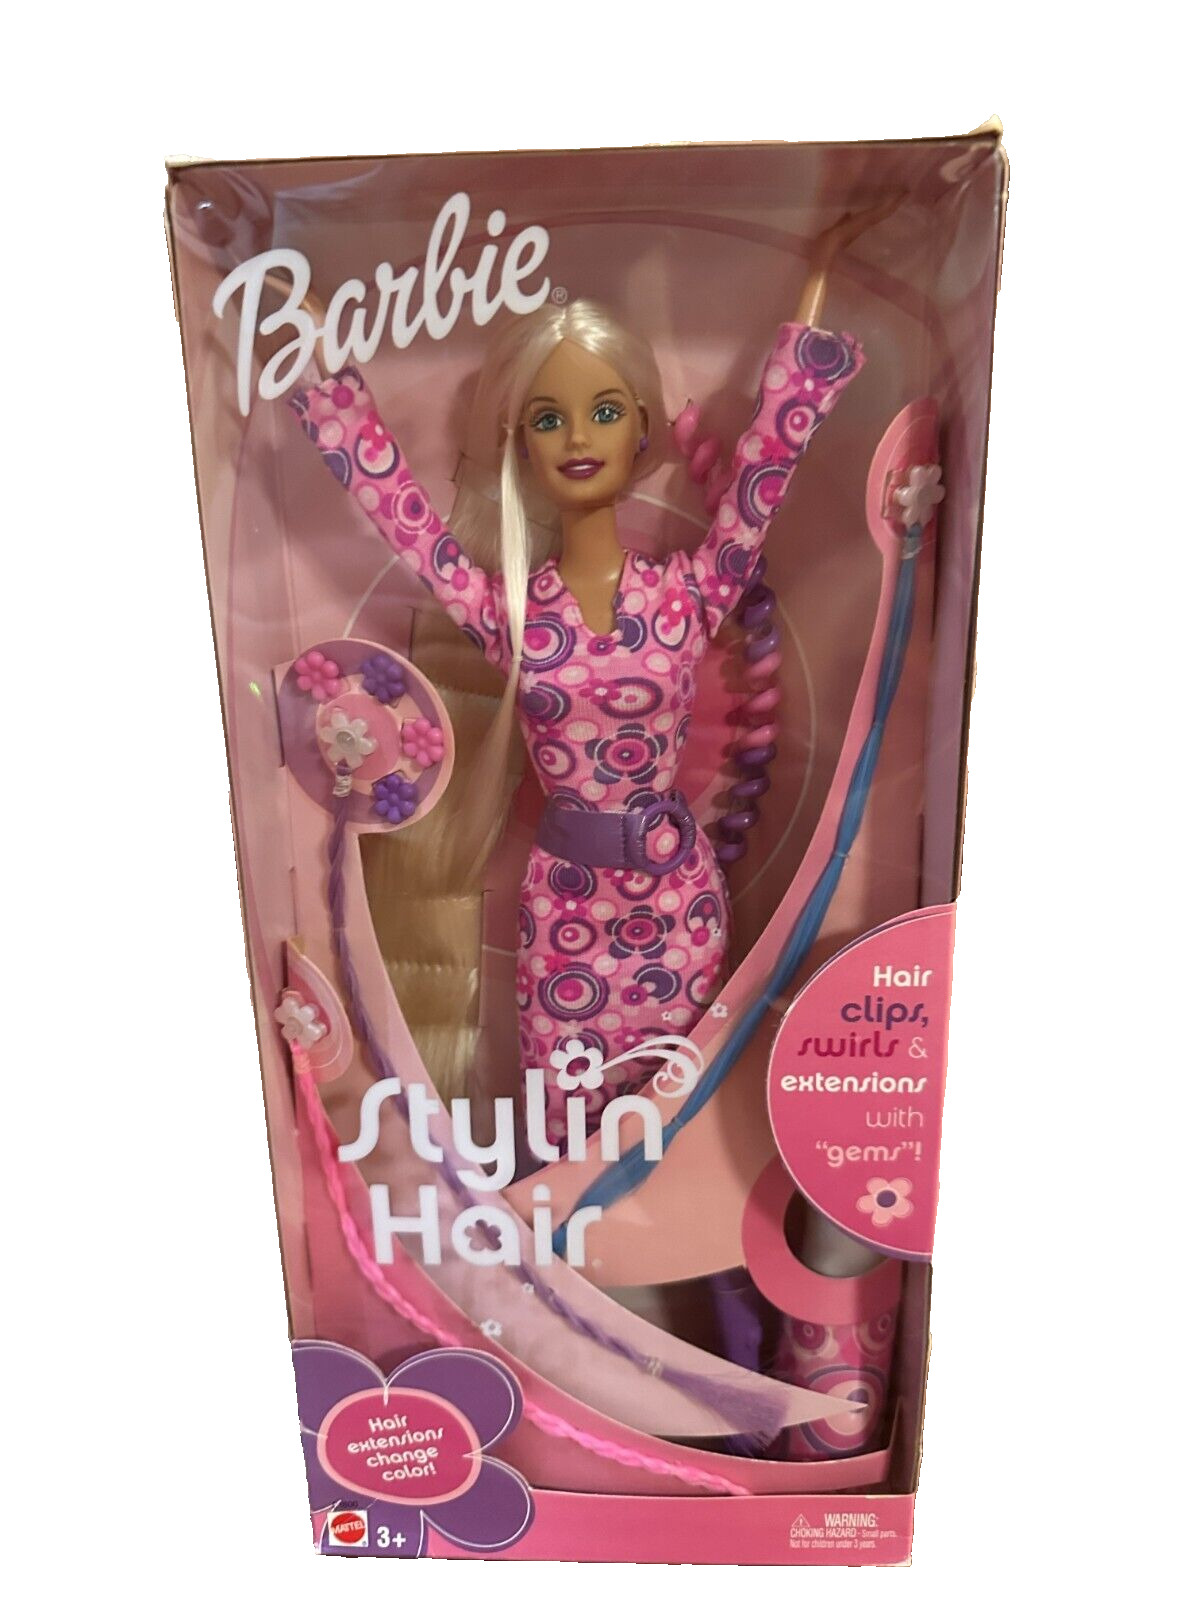 VERY RARE 2002 Stylin Hair Barbie Doll-New in Box